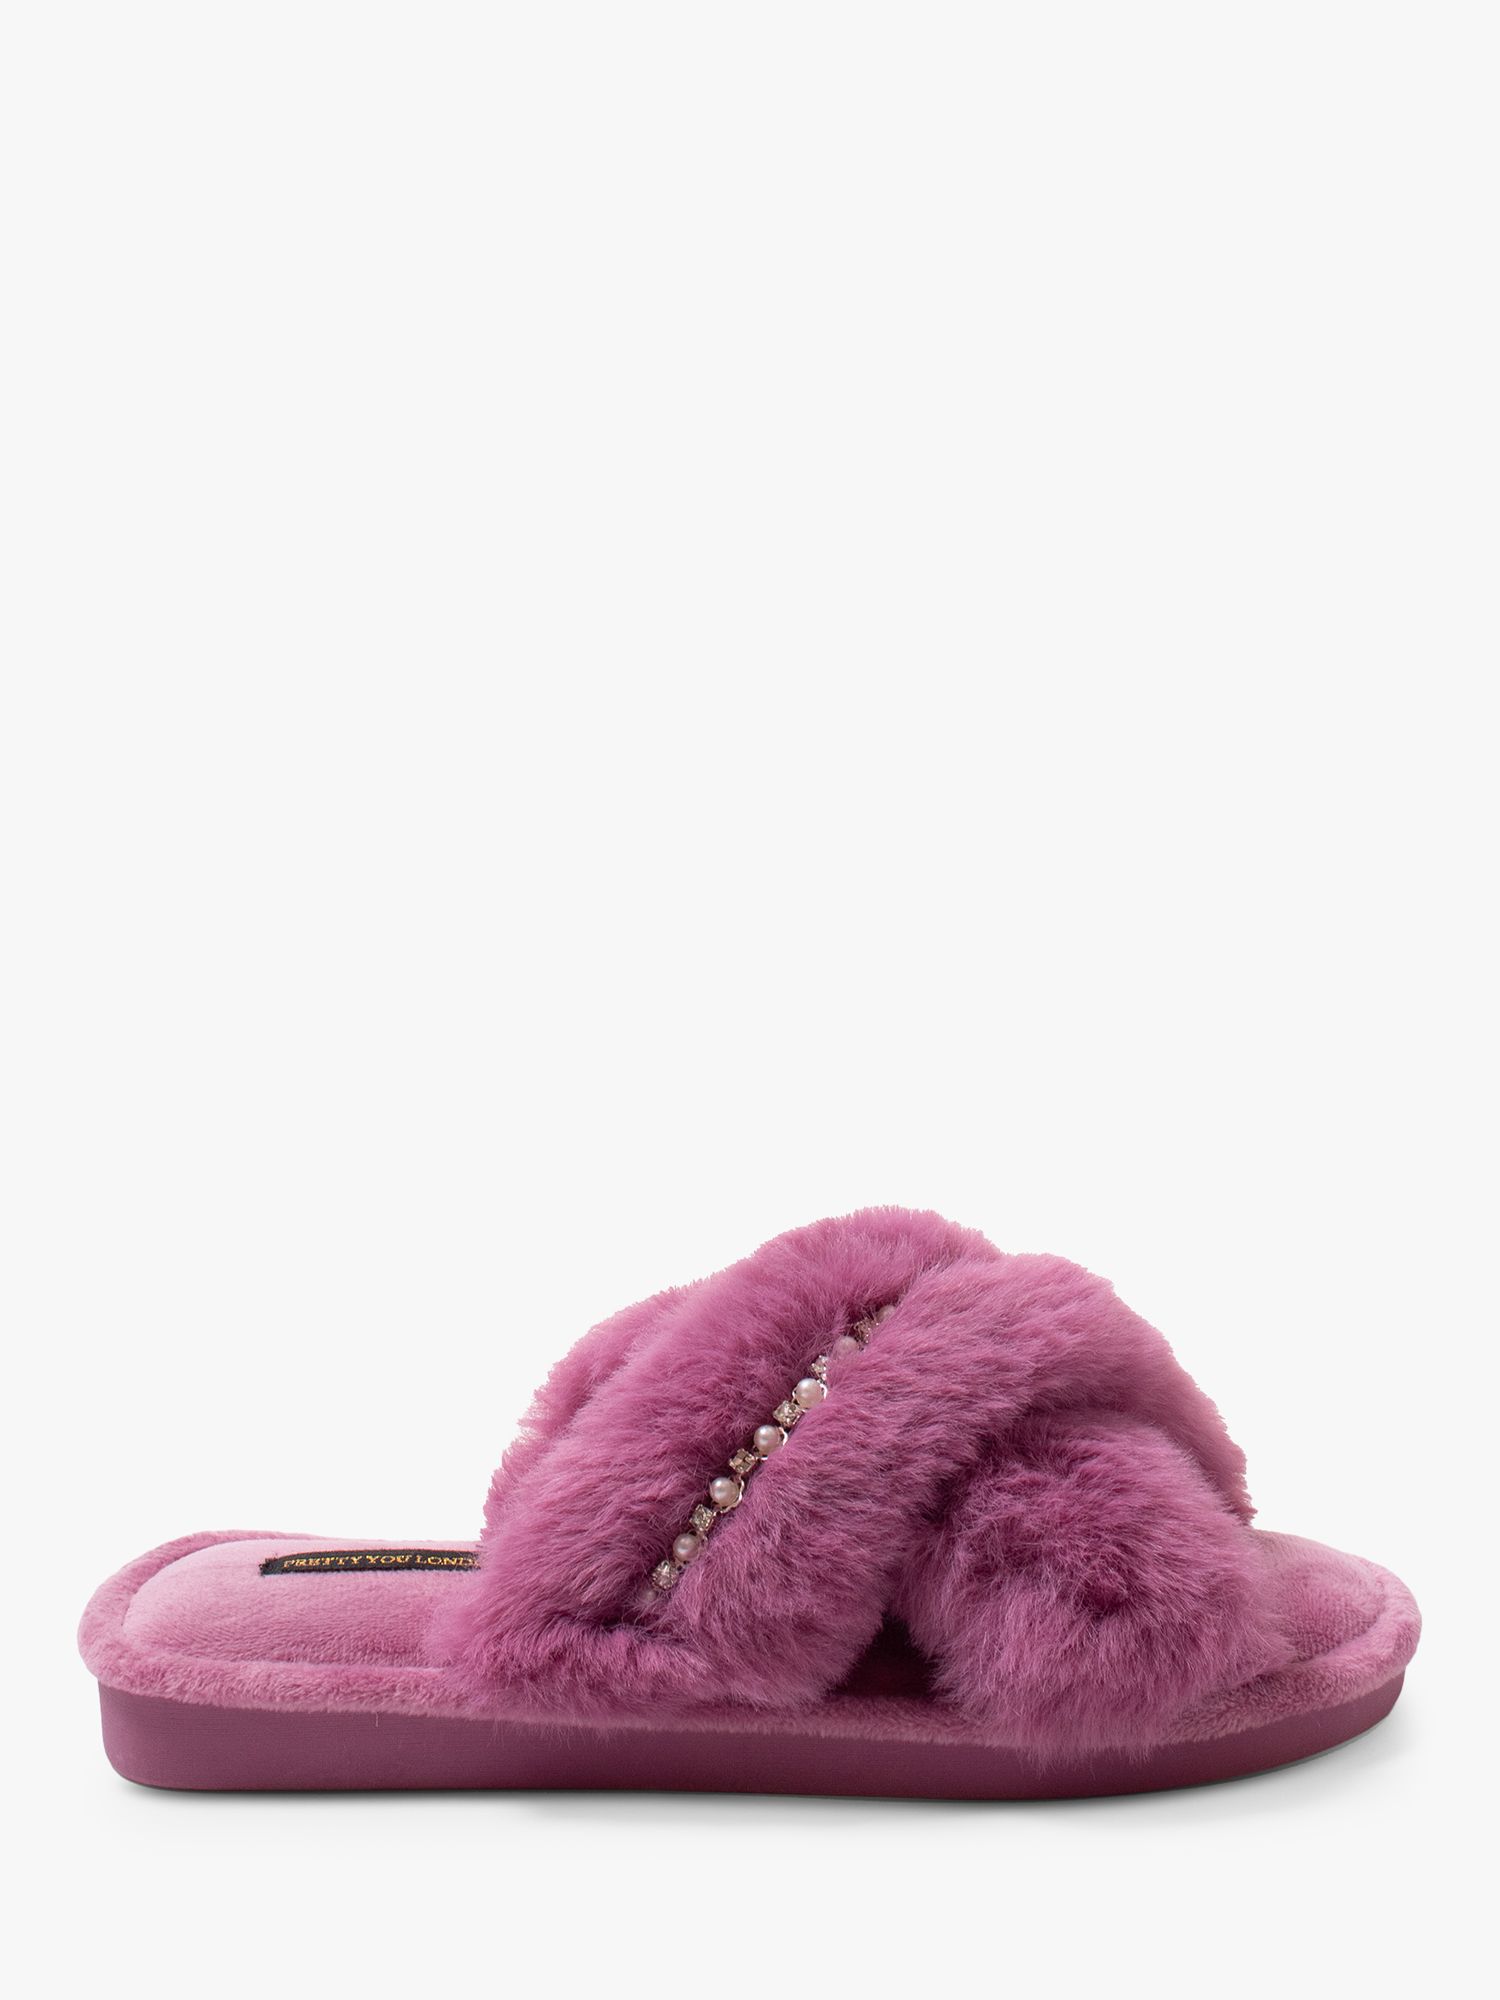 Buy Pretty You London Freya Embellished Slippers Online at johnlewis.com